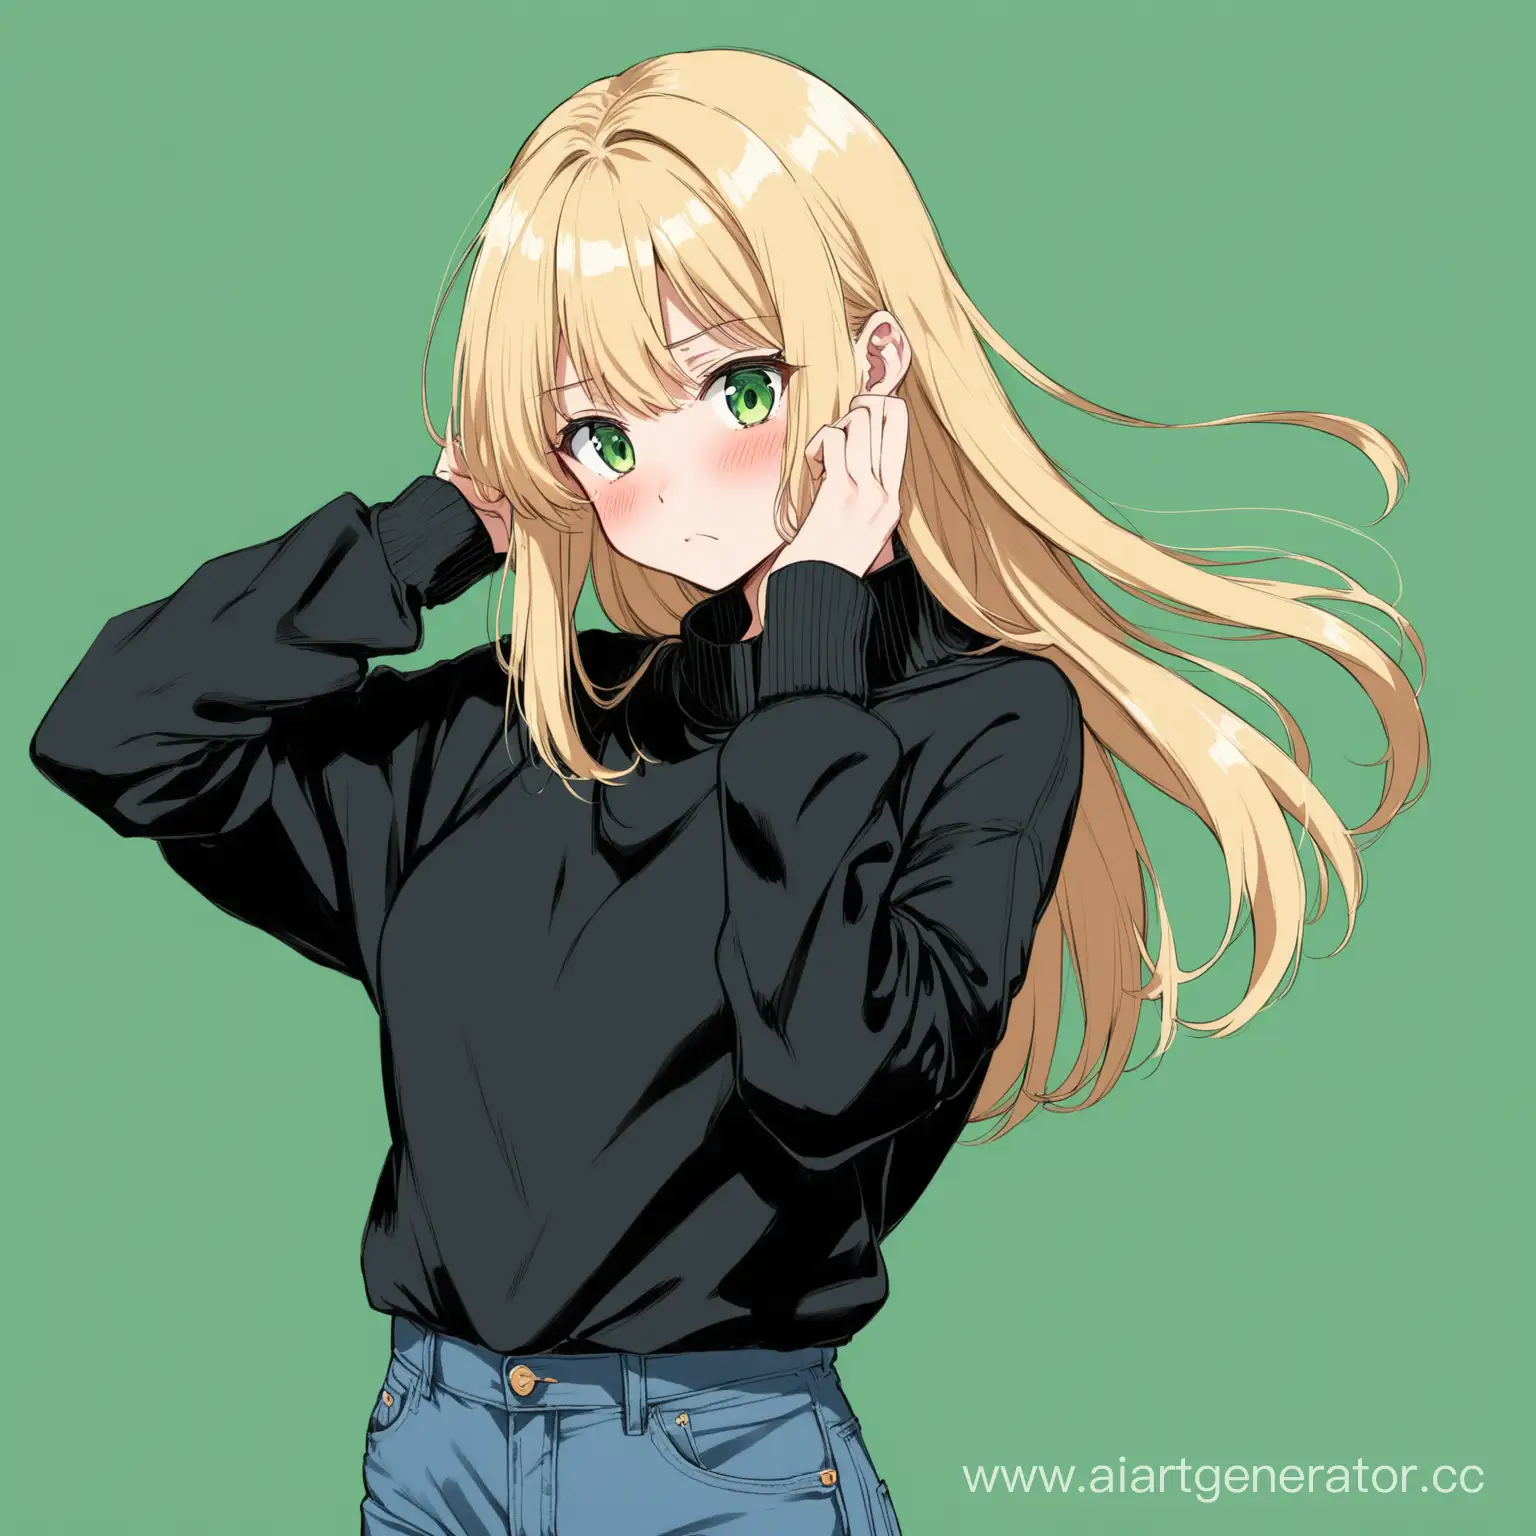 Blonde-Anime-Girl-in-Black-Sweater-Embarrassed-Touching-Hair-on-Green-Background